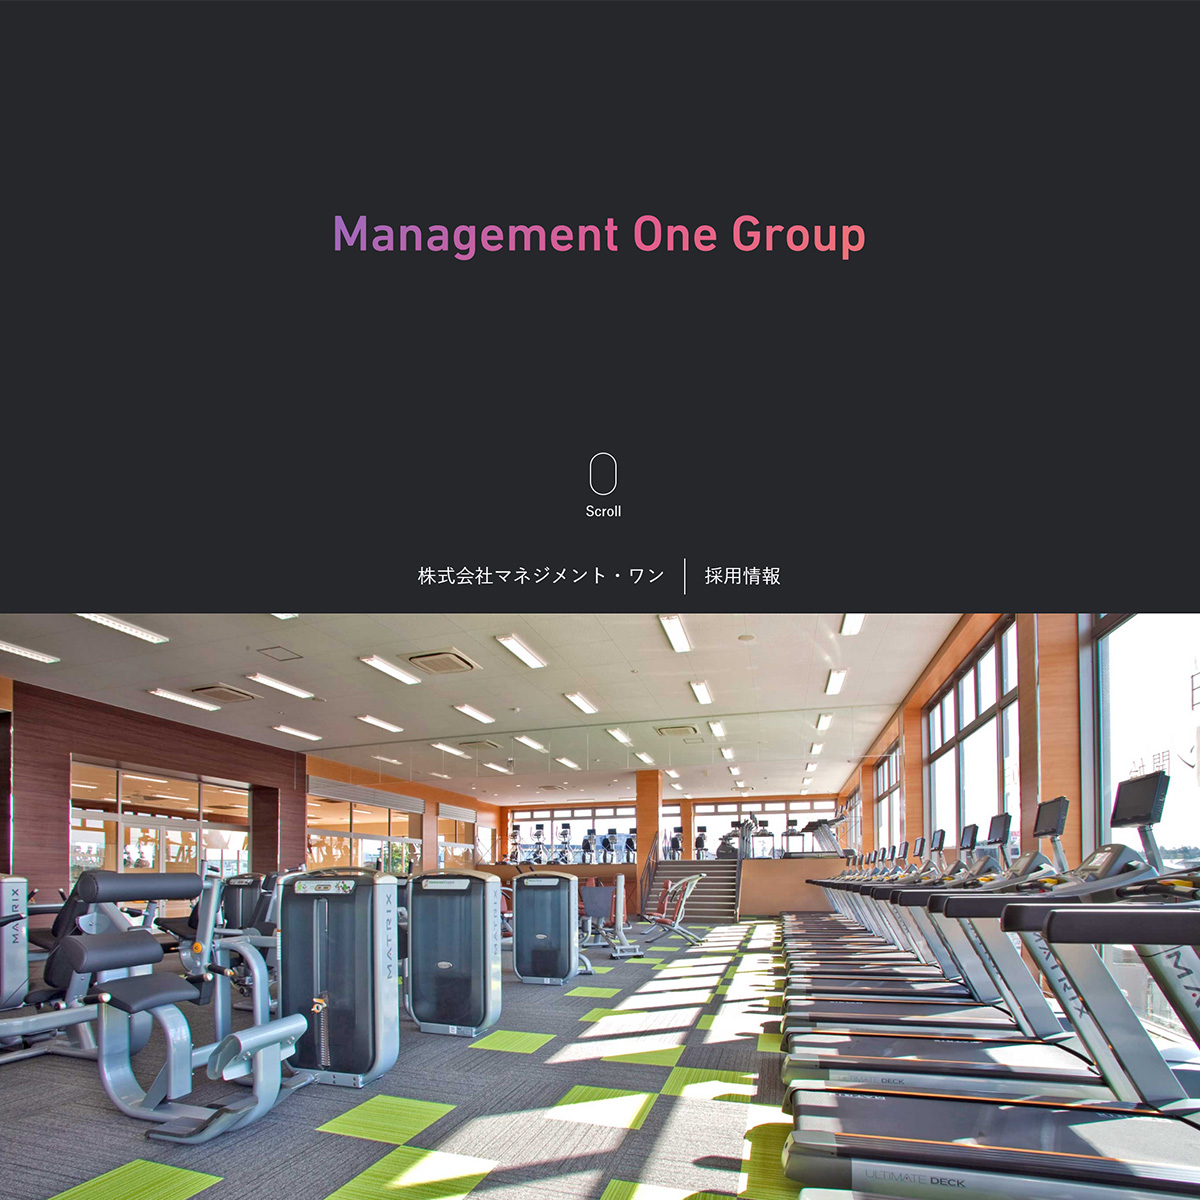 Management One Group